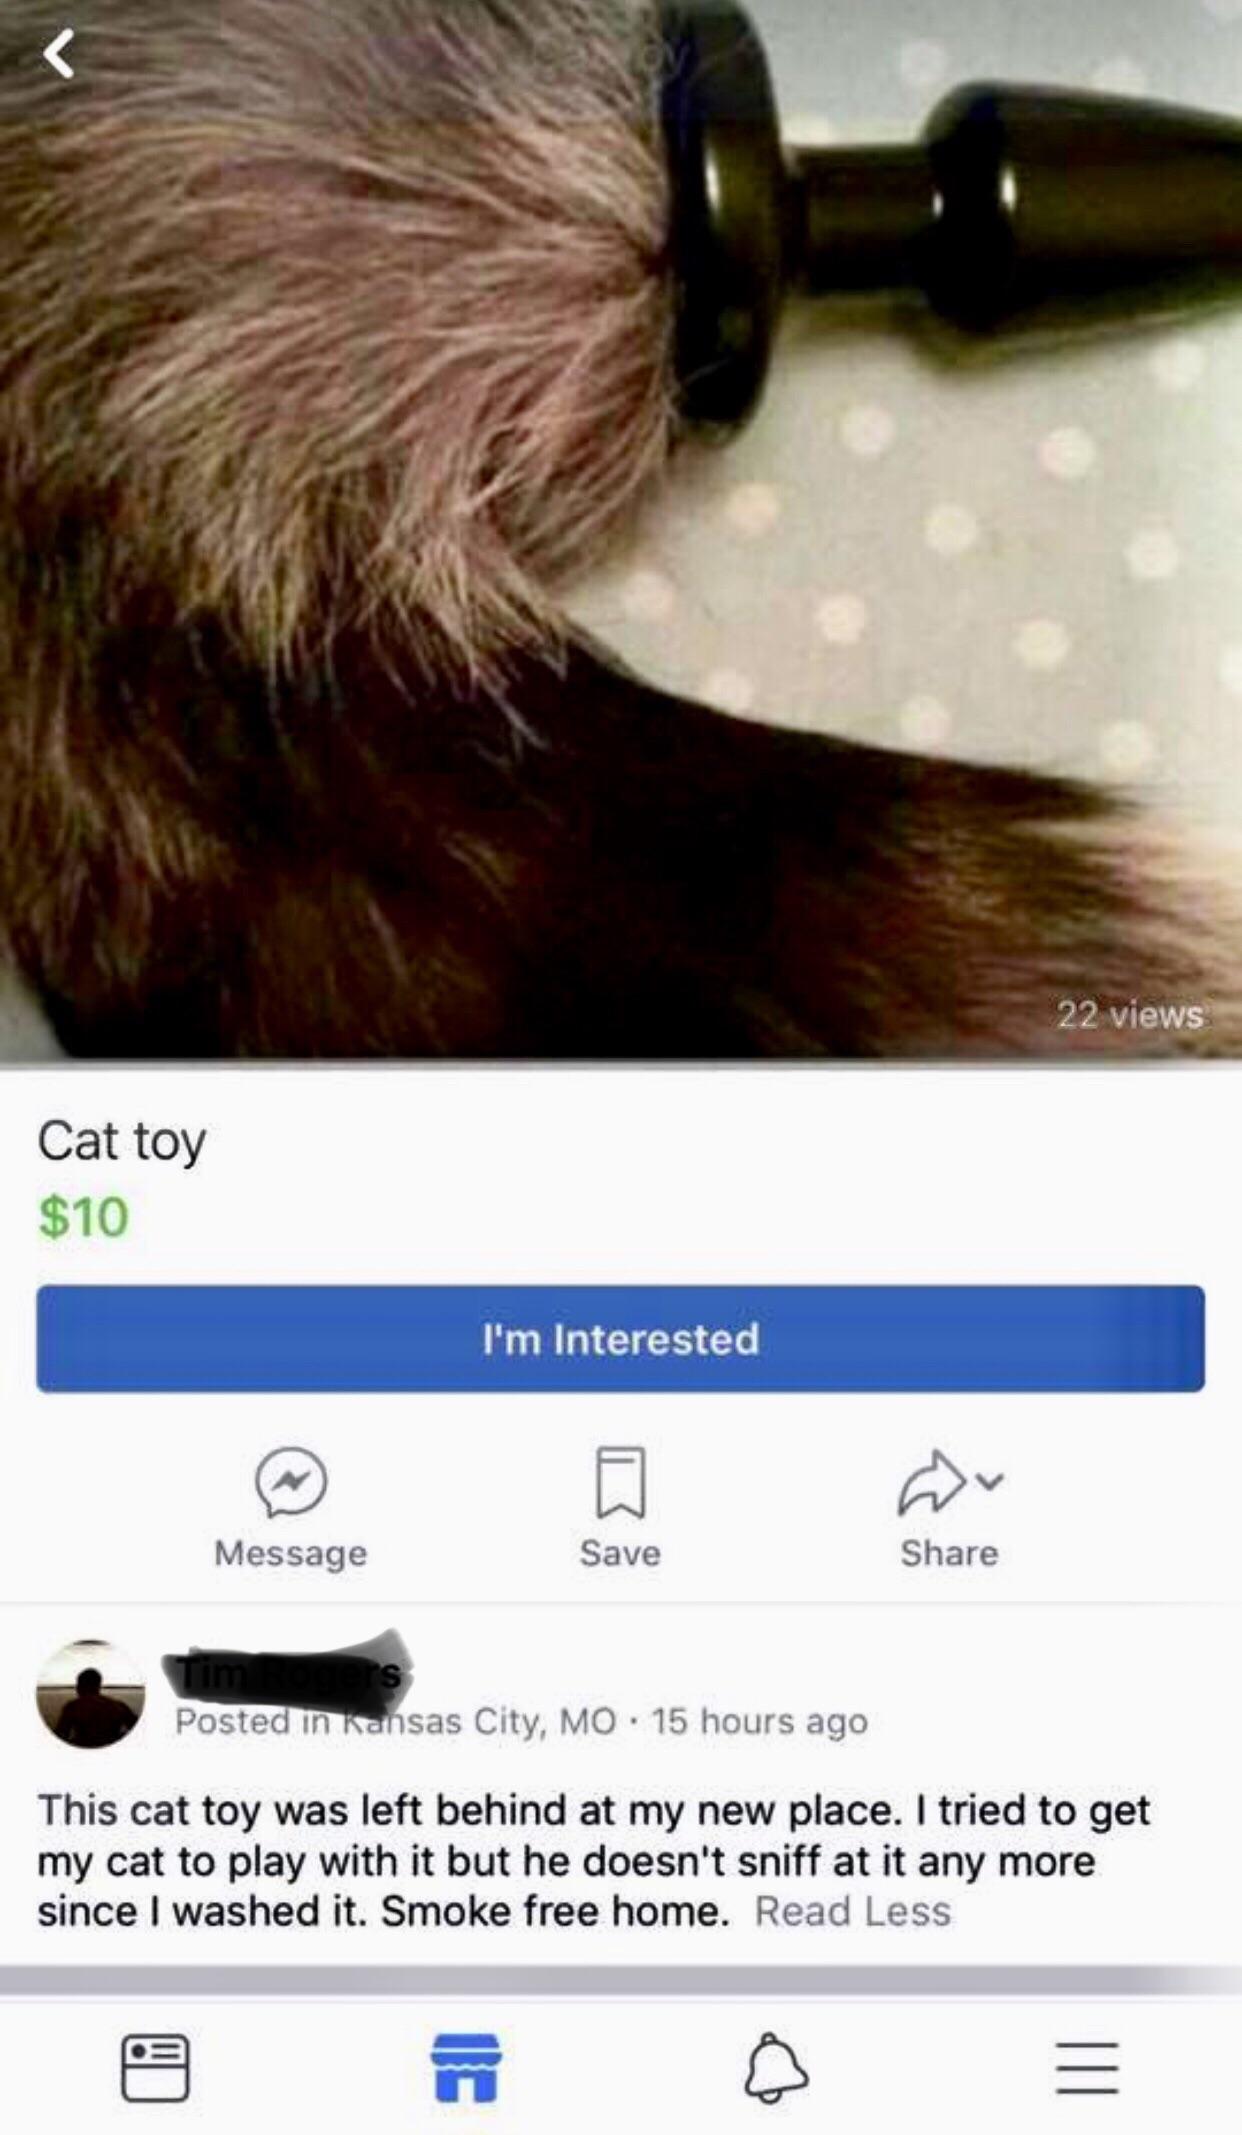 Found On FB Marketplace Yesterday Morning